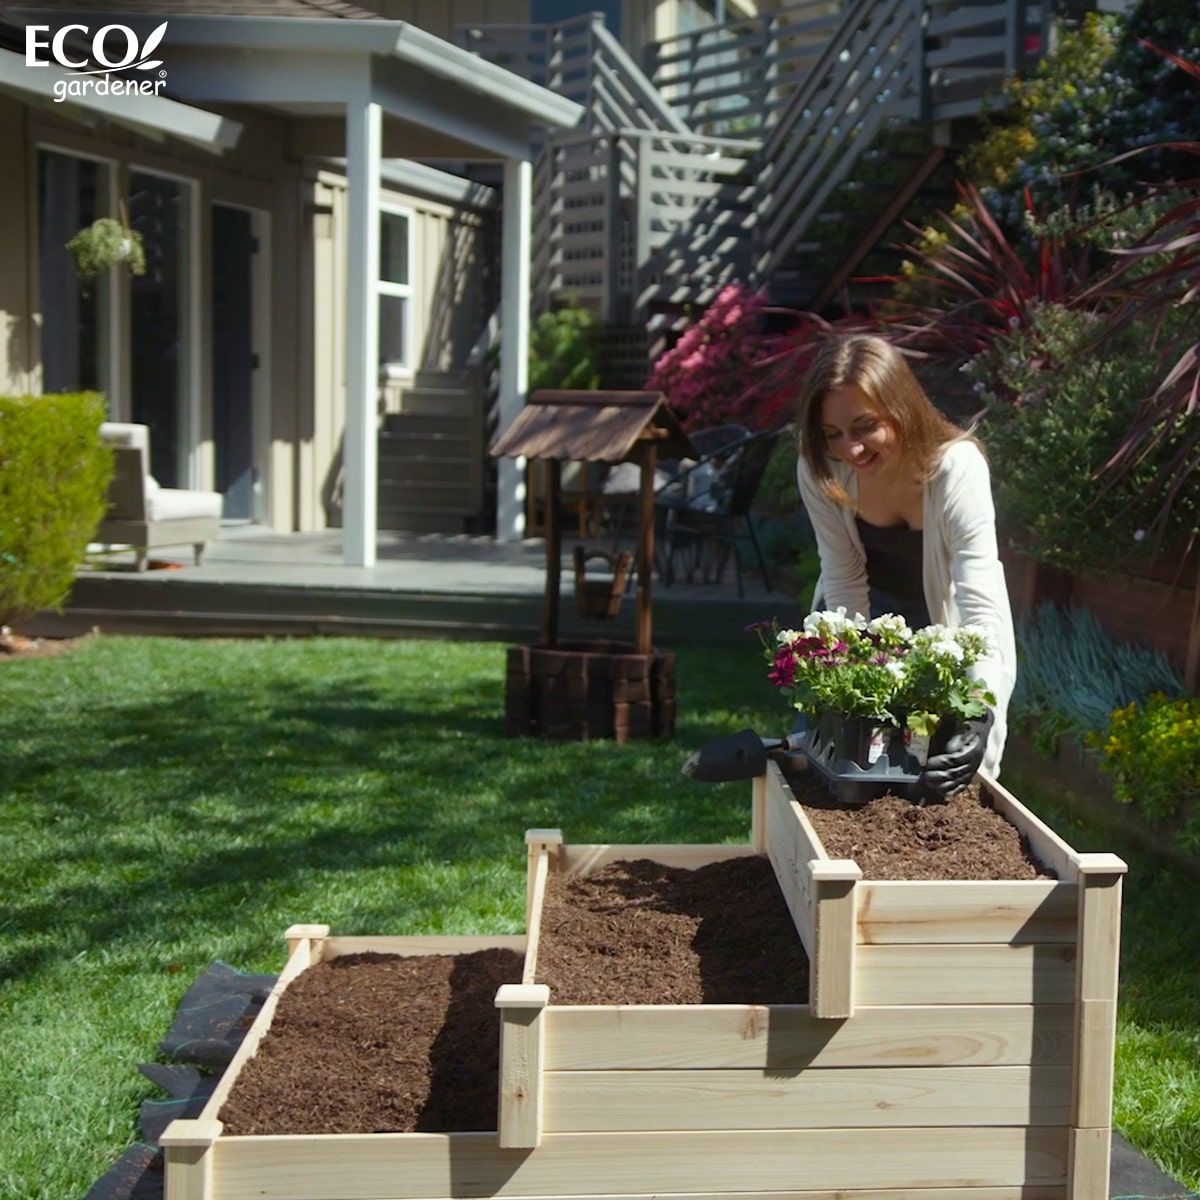 A woman planting in an Ecogardener Tiered Raised Bed Planter.